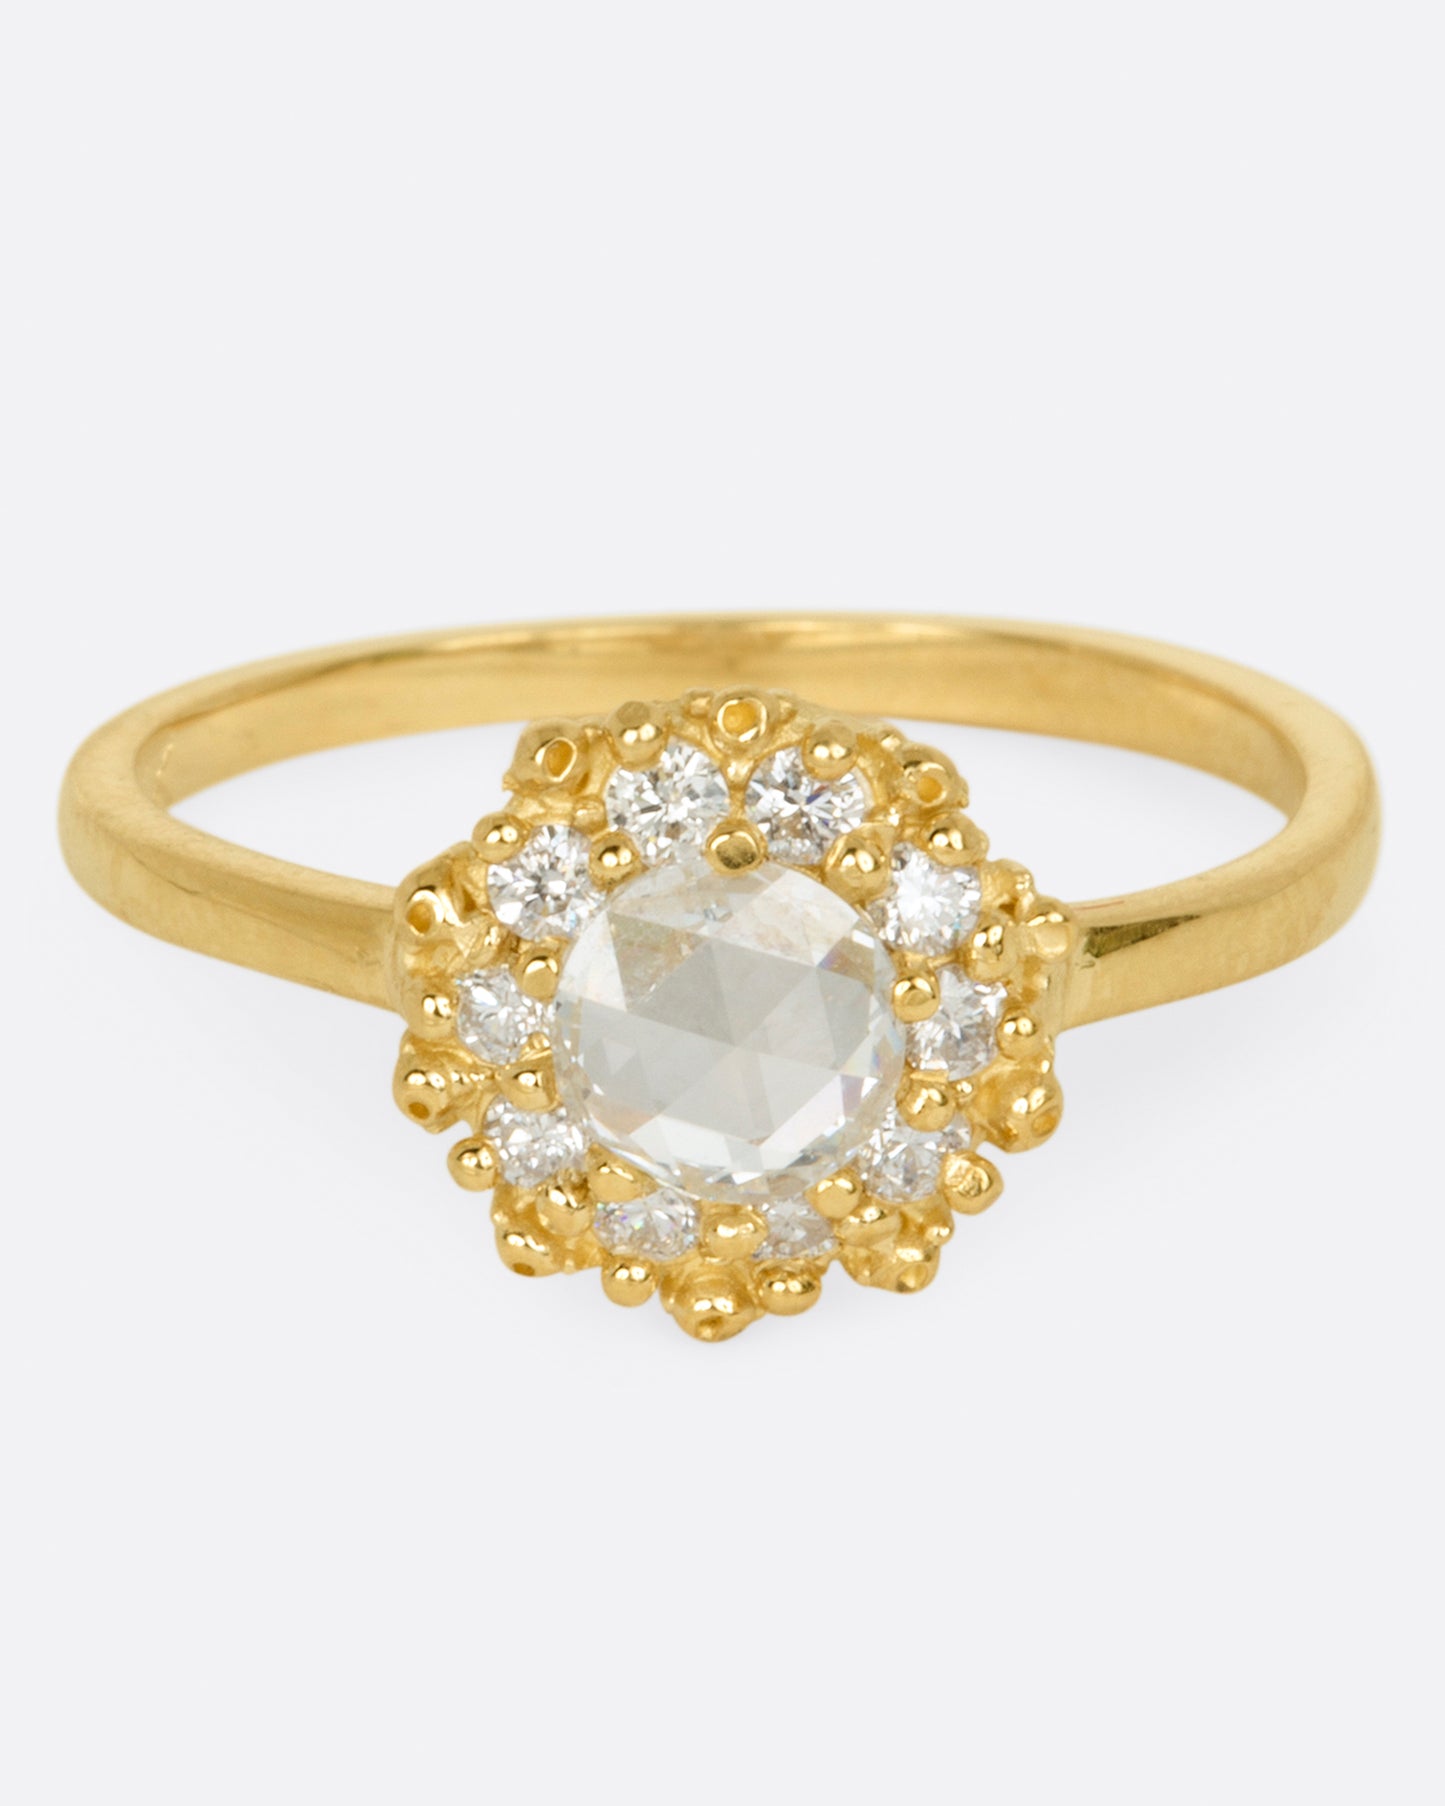 A rose cut round diamond ring with a halo of smaller round brilliant cut diamonds.